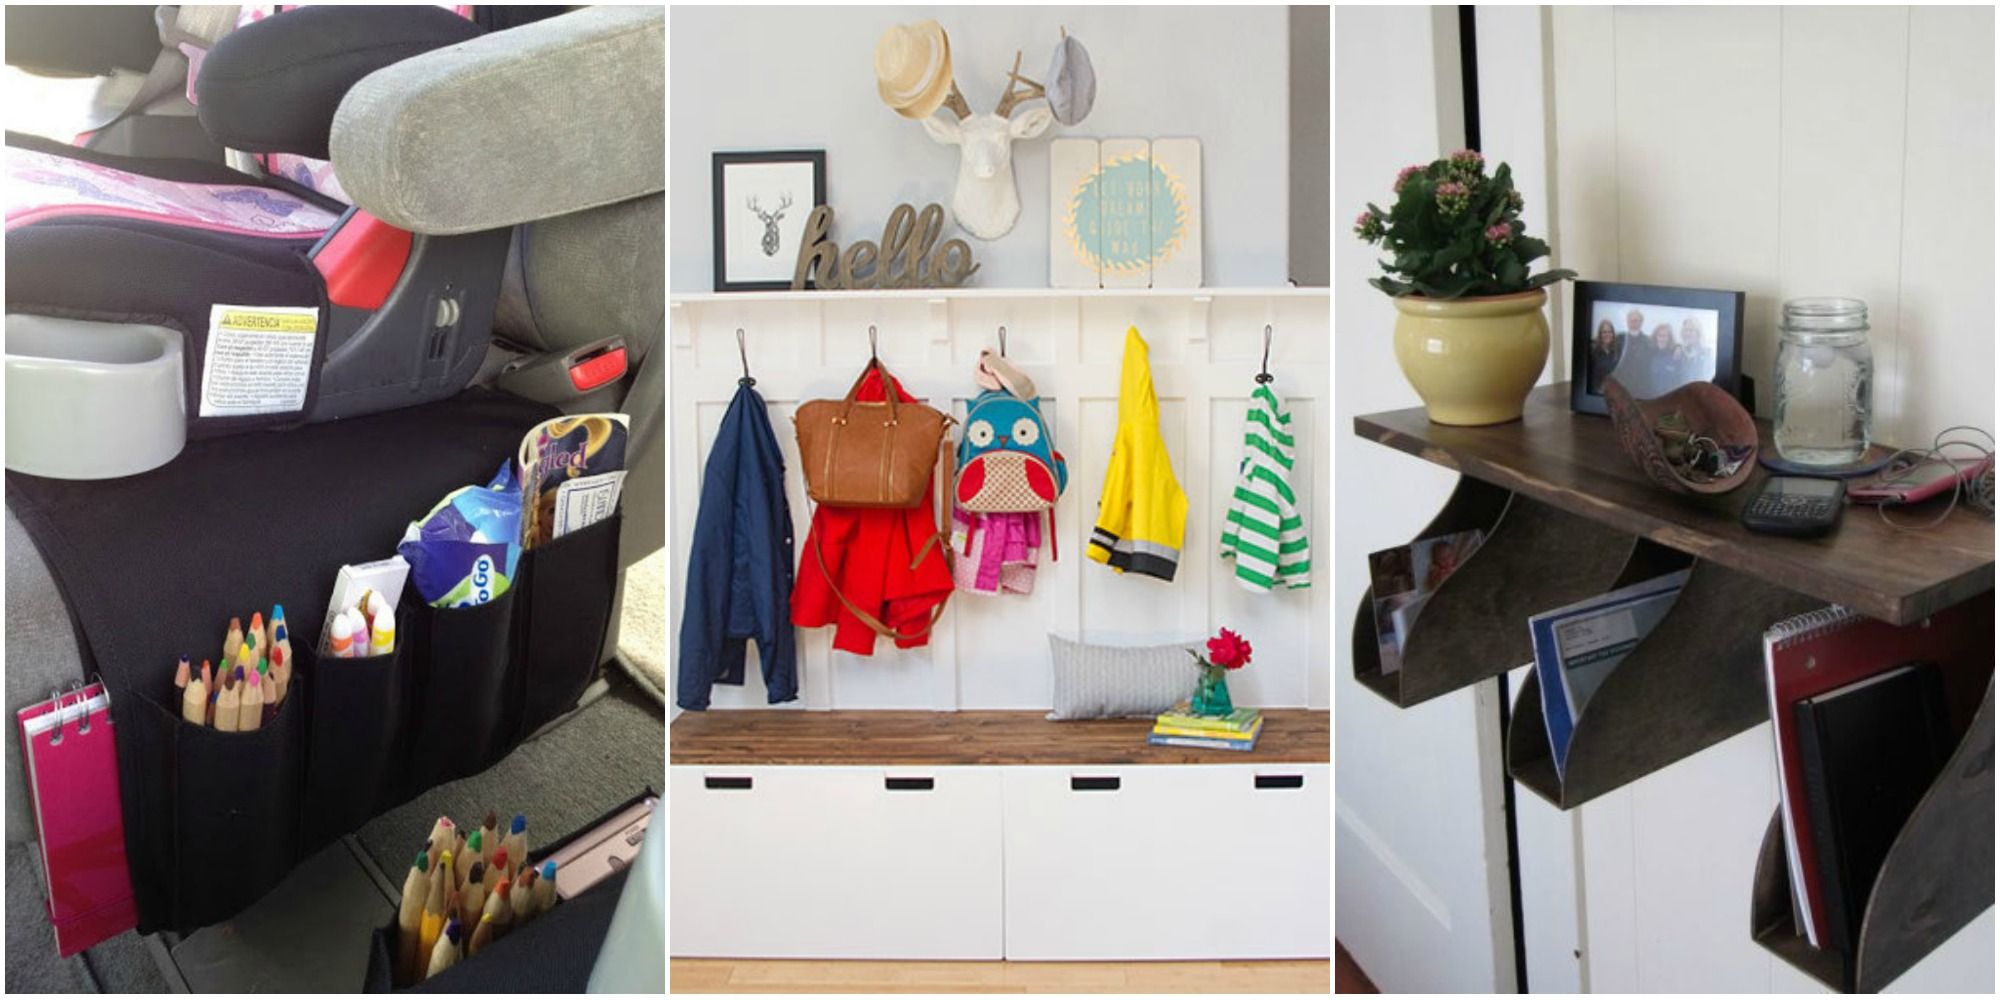 7 MUST-HAVE Ikea Organization Hacks that are under $20  Ikea organization,  Ikea kitchen storage, Ikea organization hacks